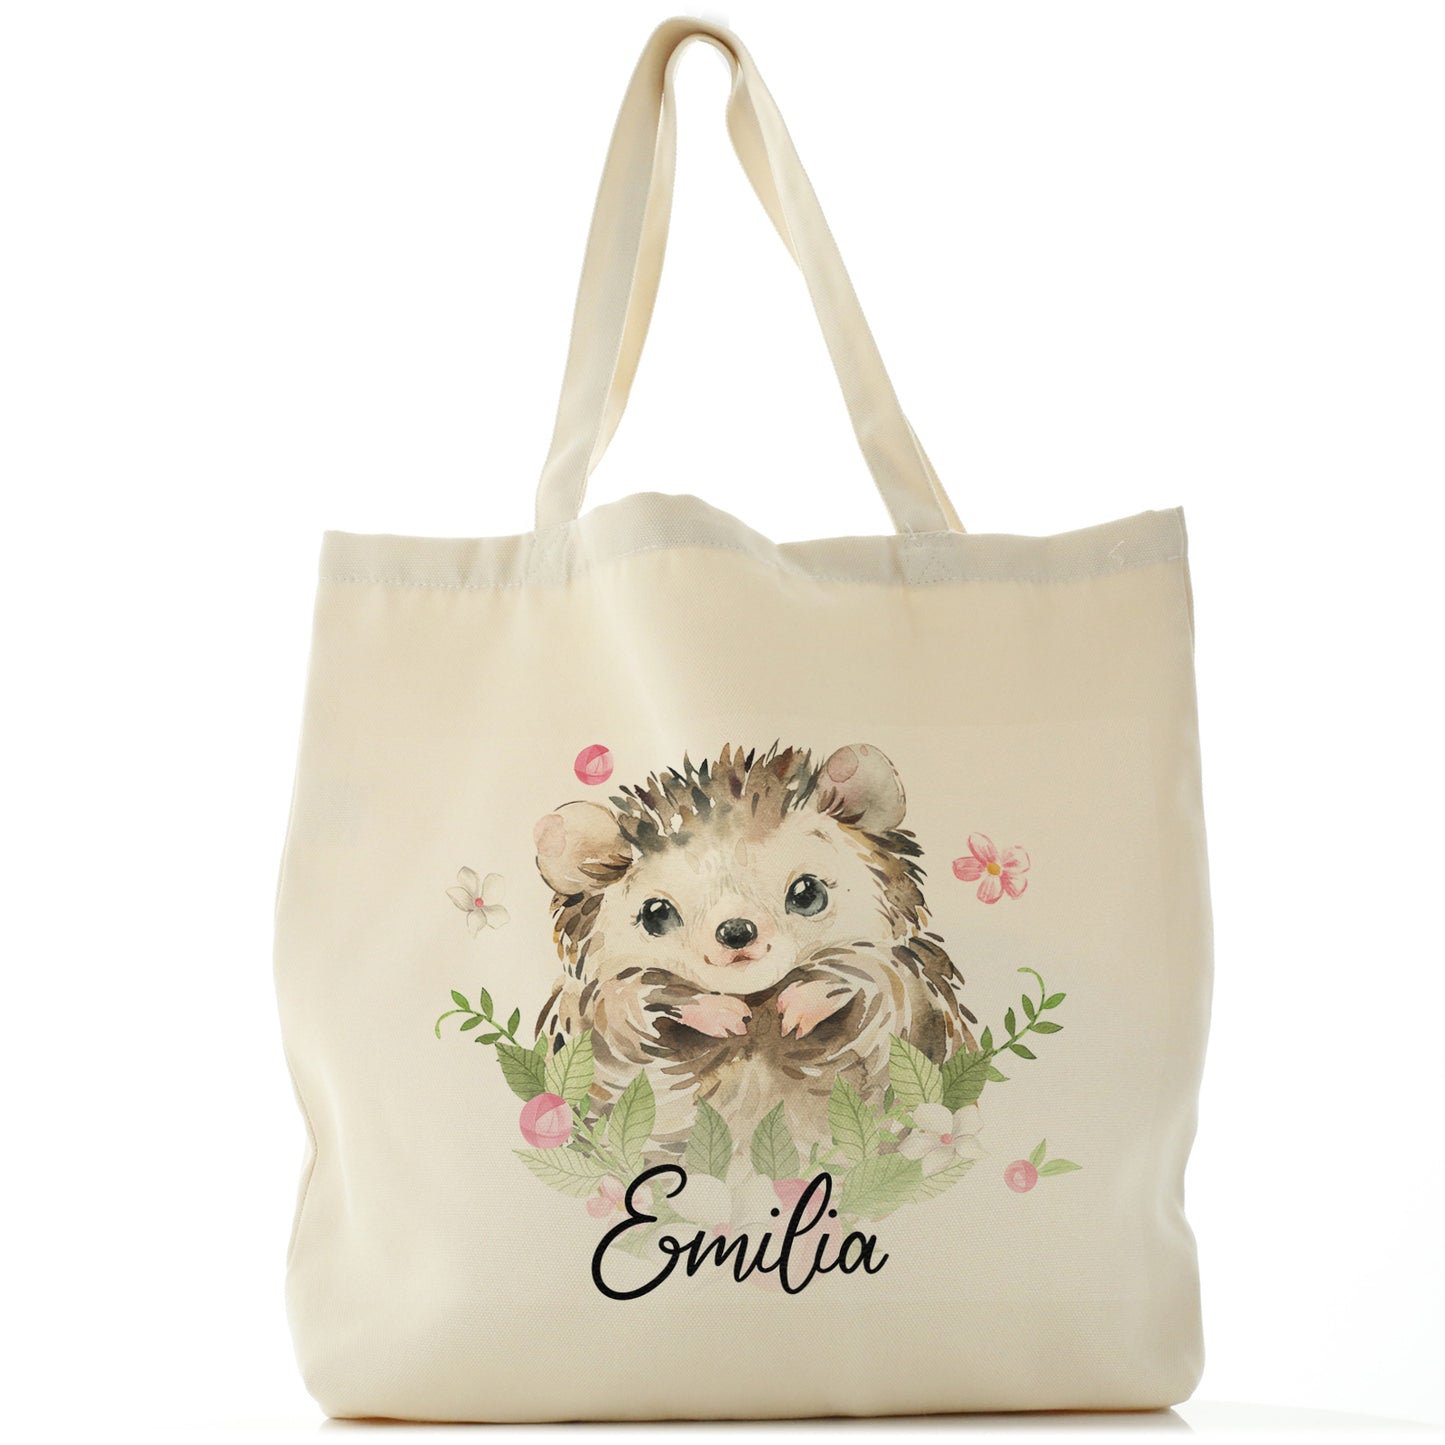 Personalised Canvas Tote Bag with Hedgehog Pink Flowers and Cute Text